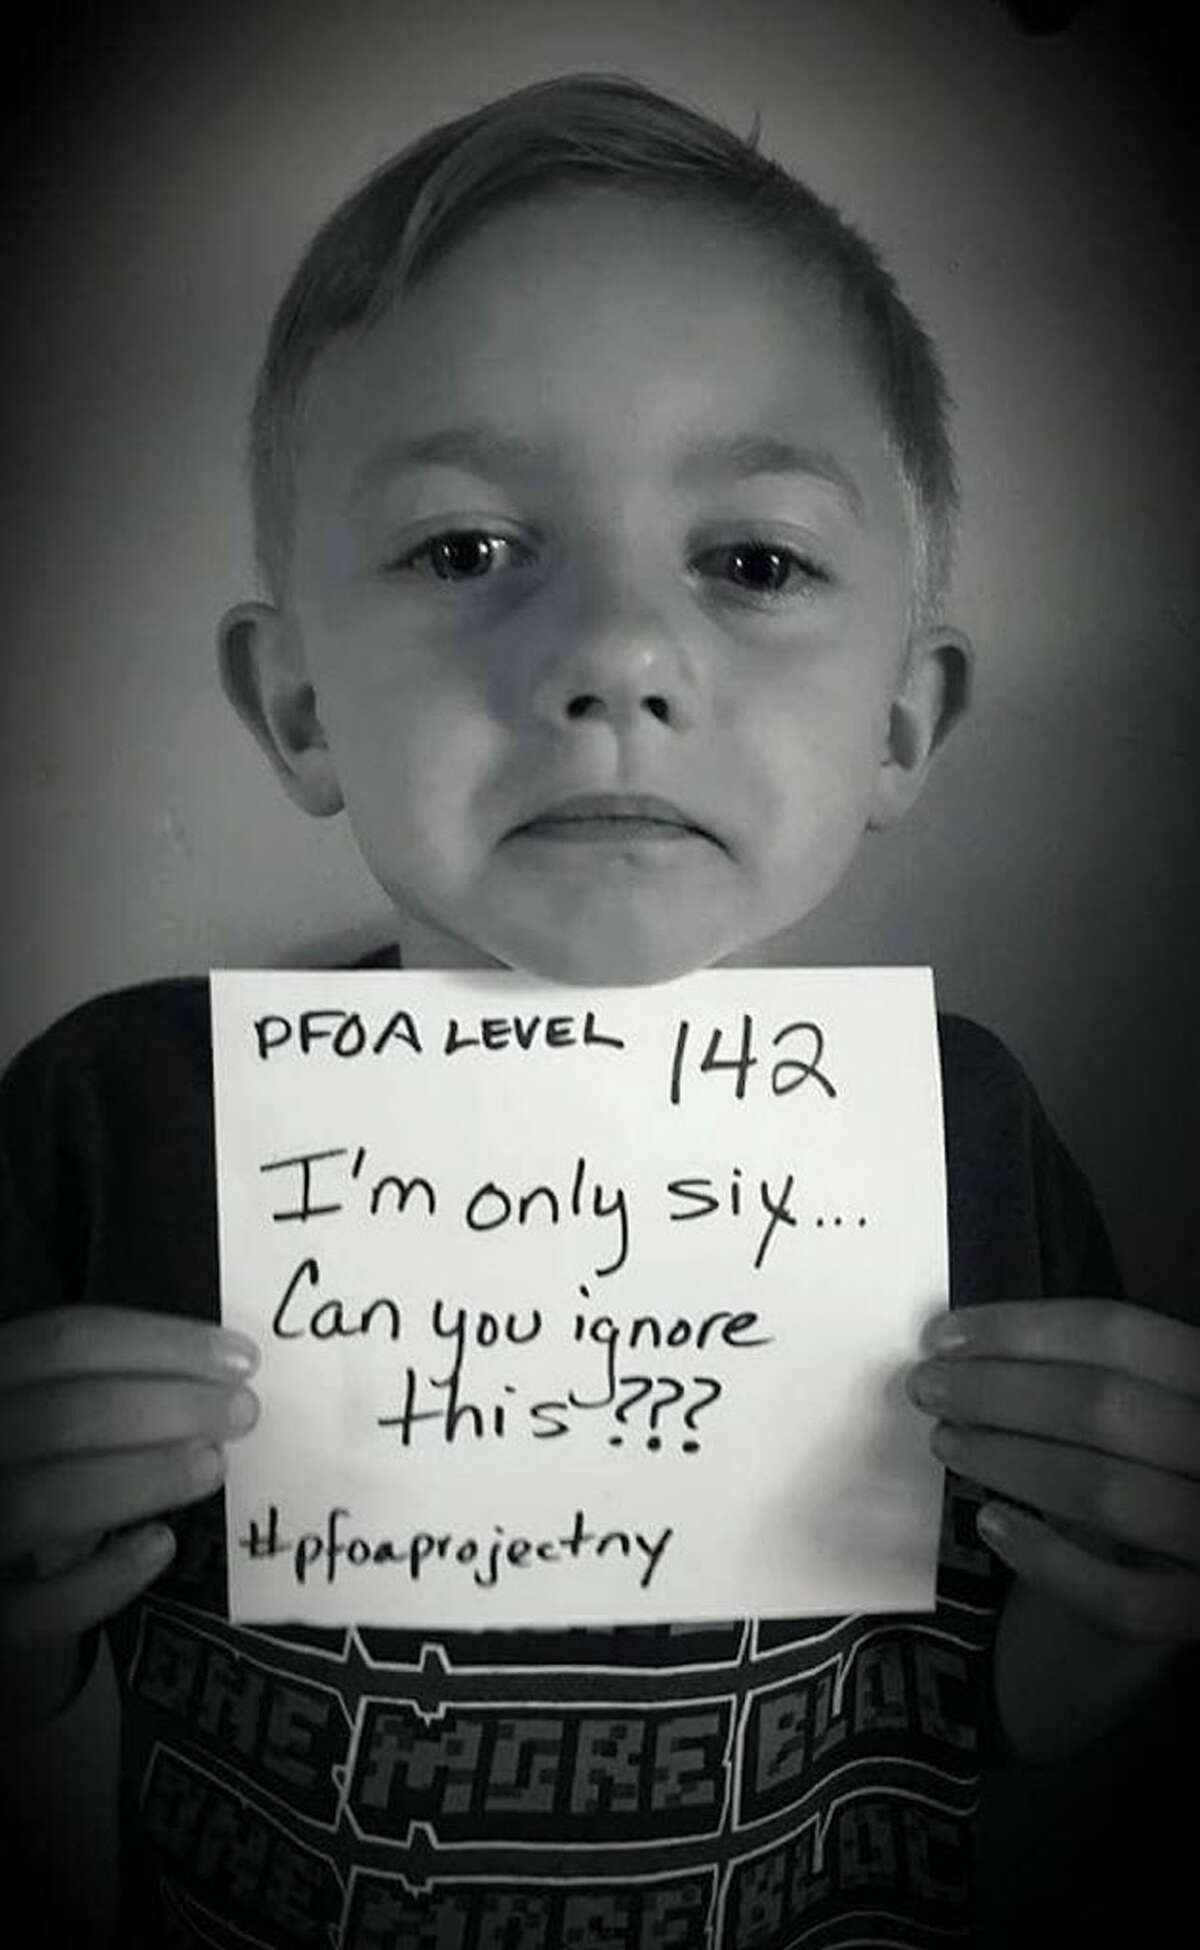 Hoosick Falls resident, Corey Aldrich, 6, displays a sign with his body's PFOA level after receiving the results of a recent blood test conducted by the state. The photo was posted on Twitter by parents, Josh and Nikki Aldrich. (Courtesy Josh and Nikki Aldrich)